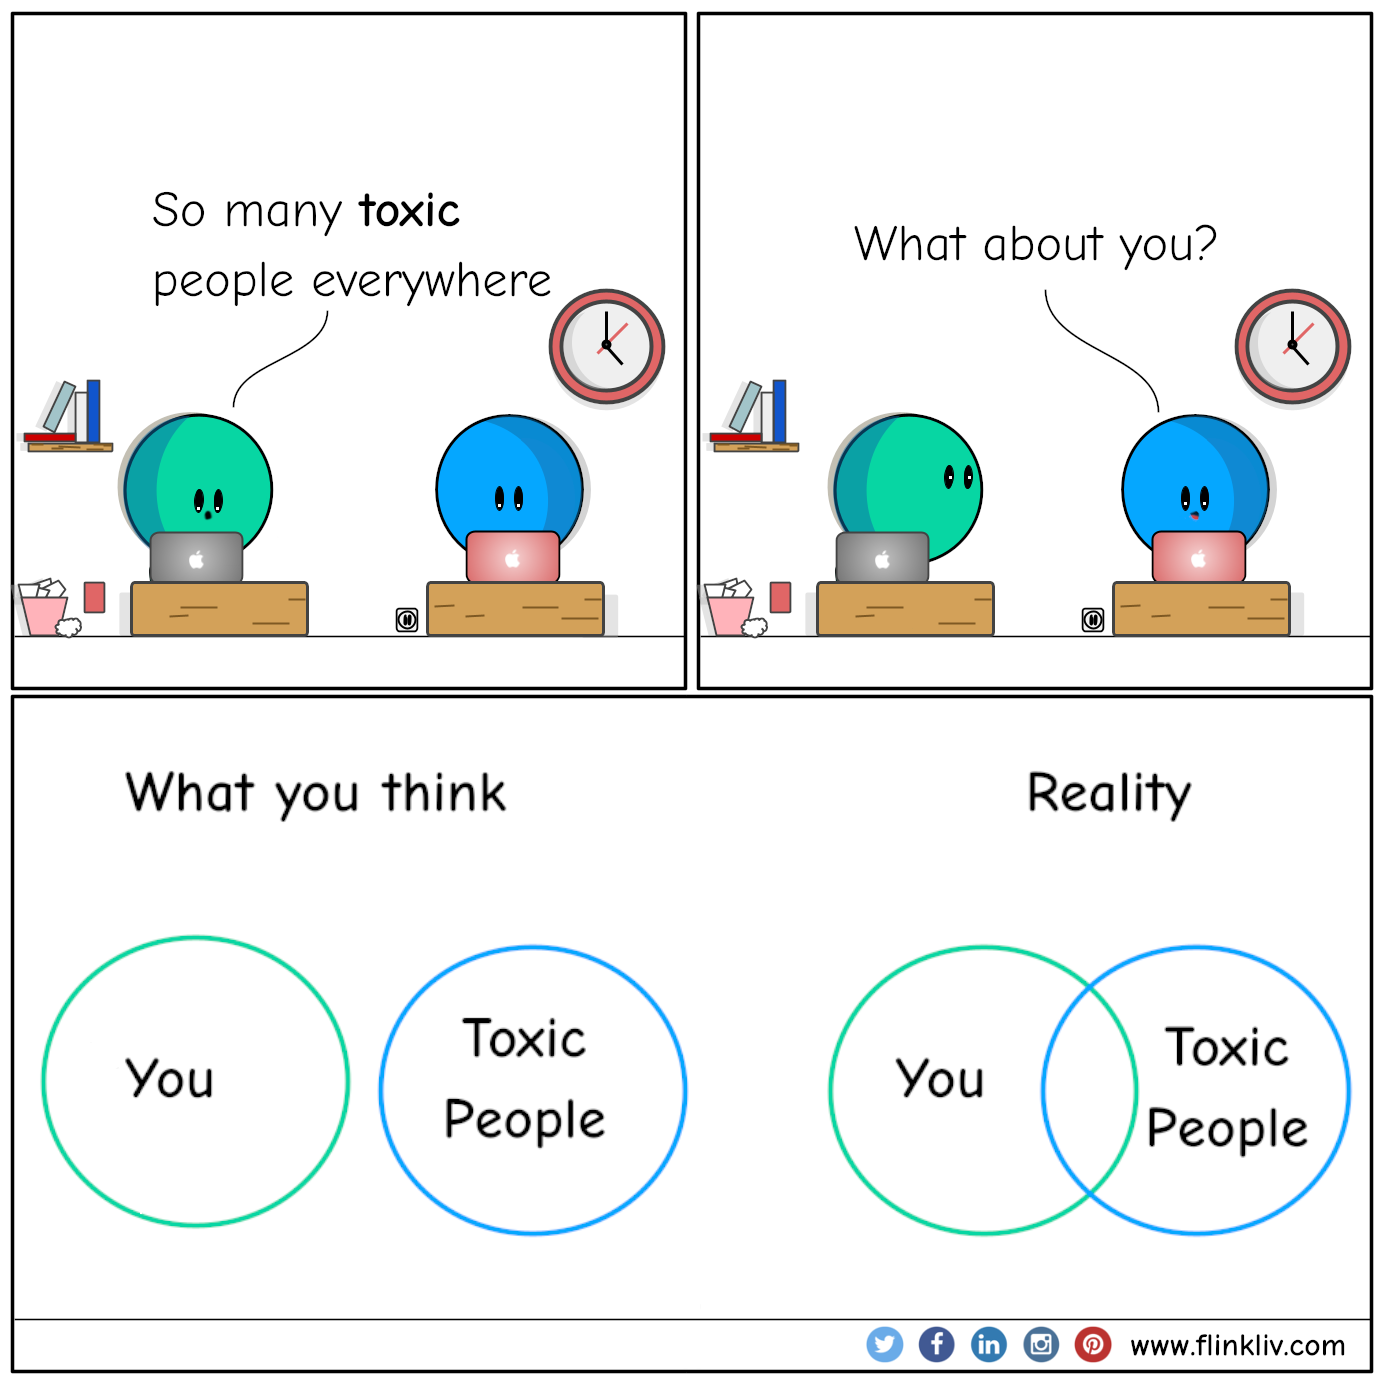 Conversation between A and B about toxic people.
				A: So many toxic people everywhere
				B: What about you?

			